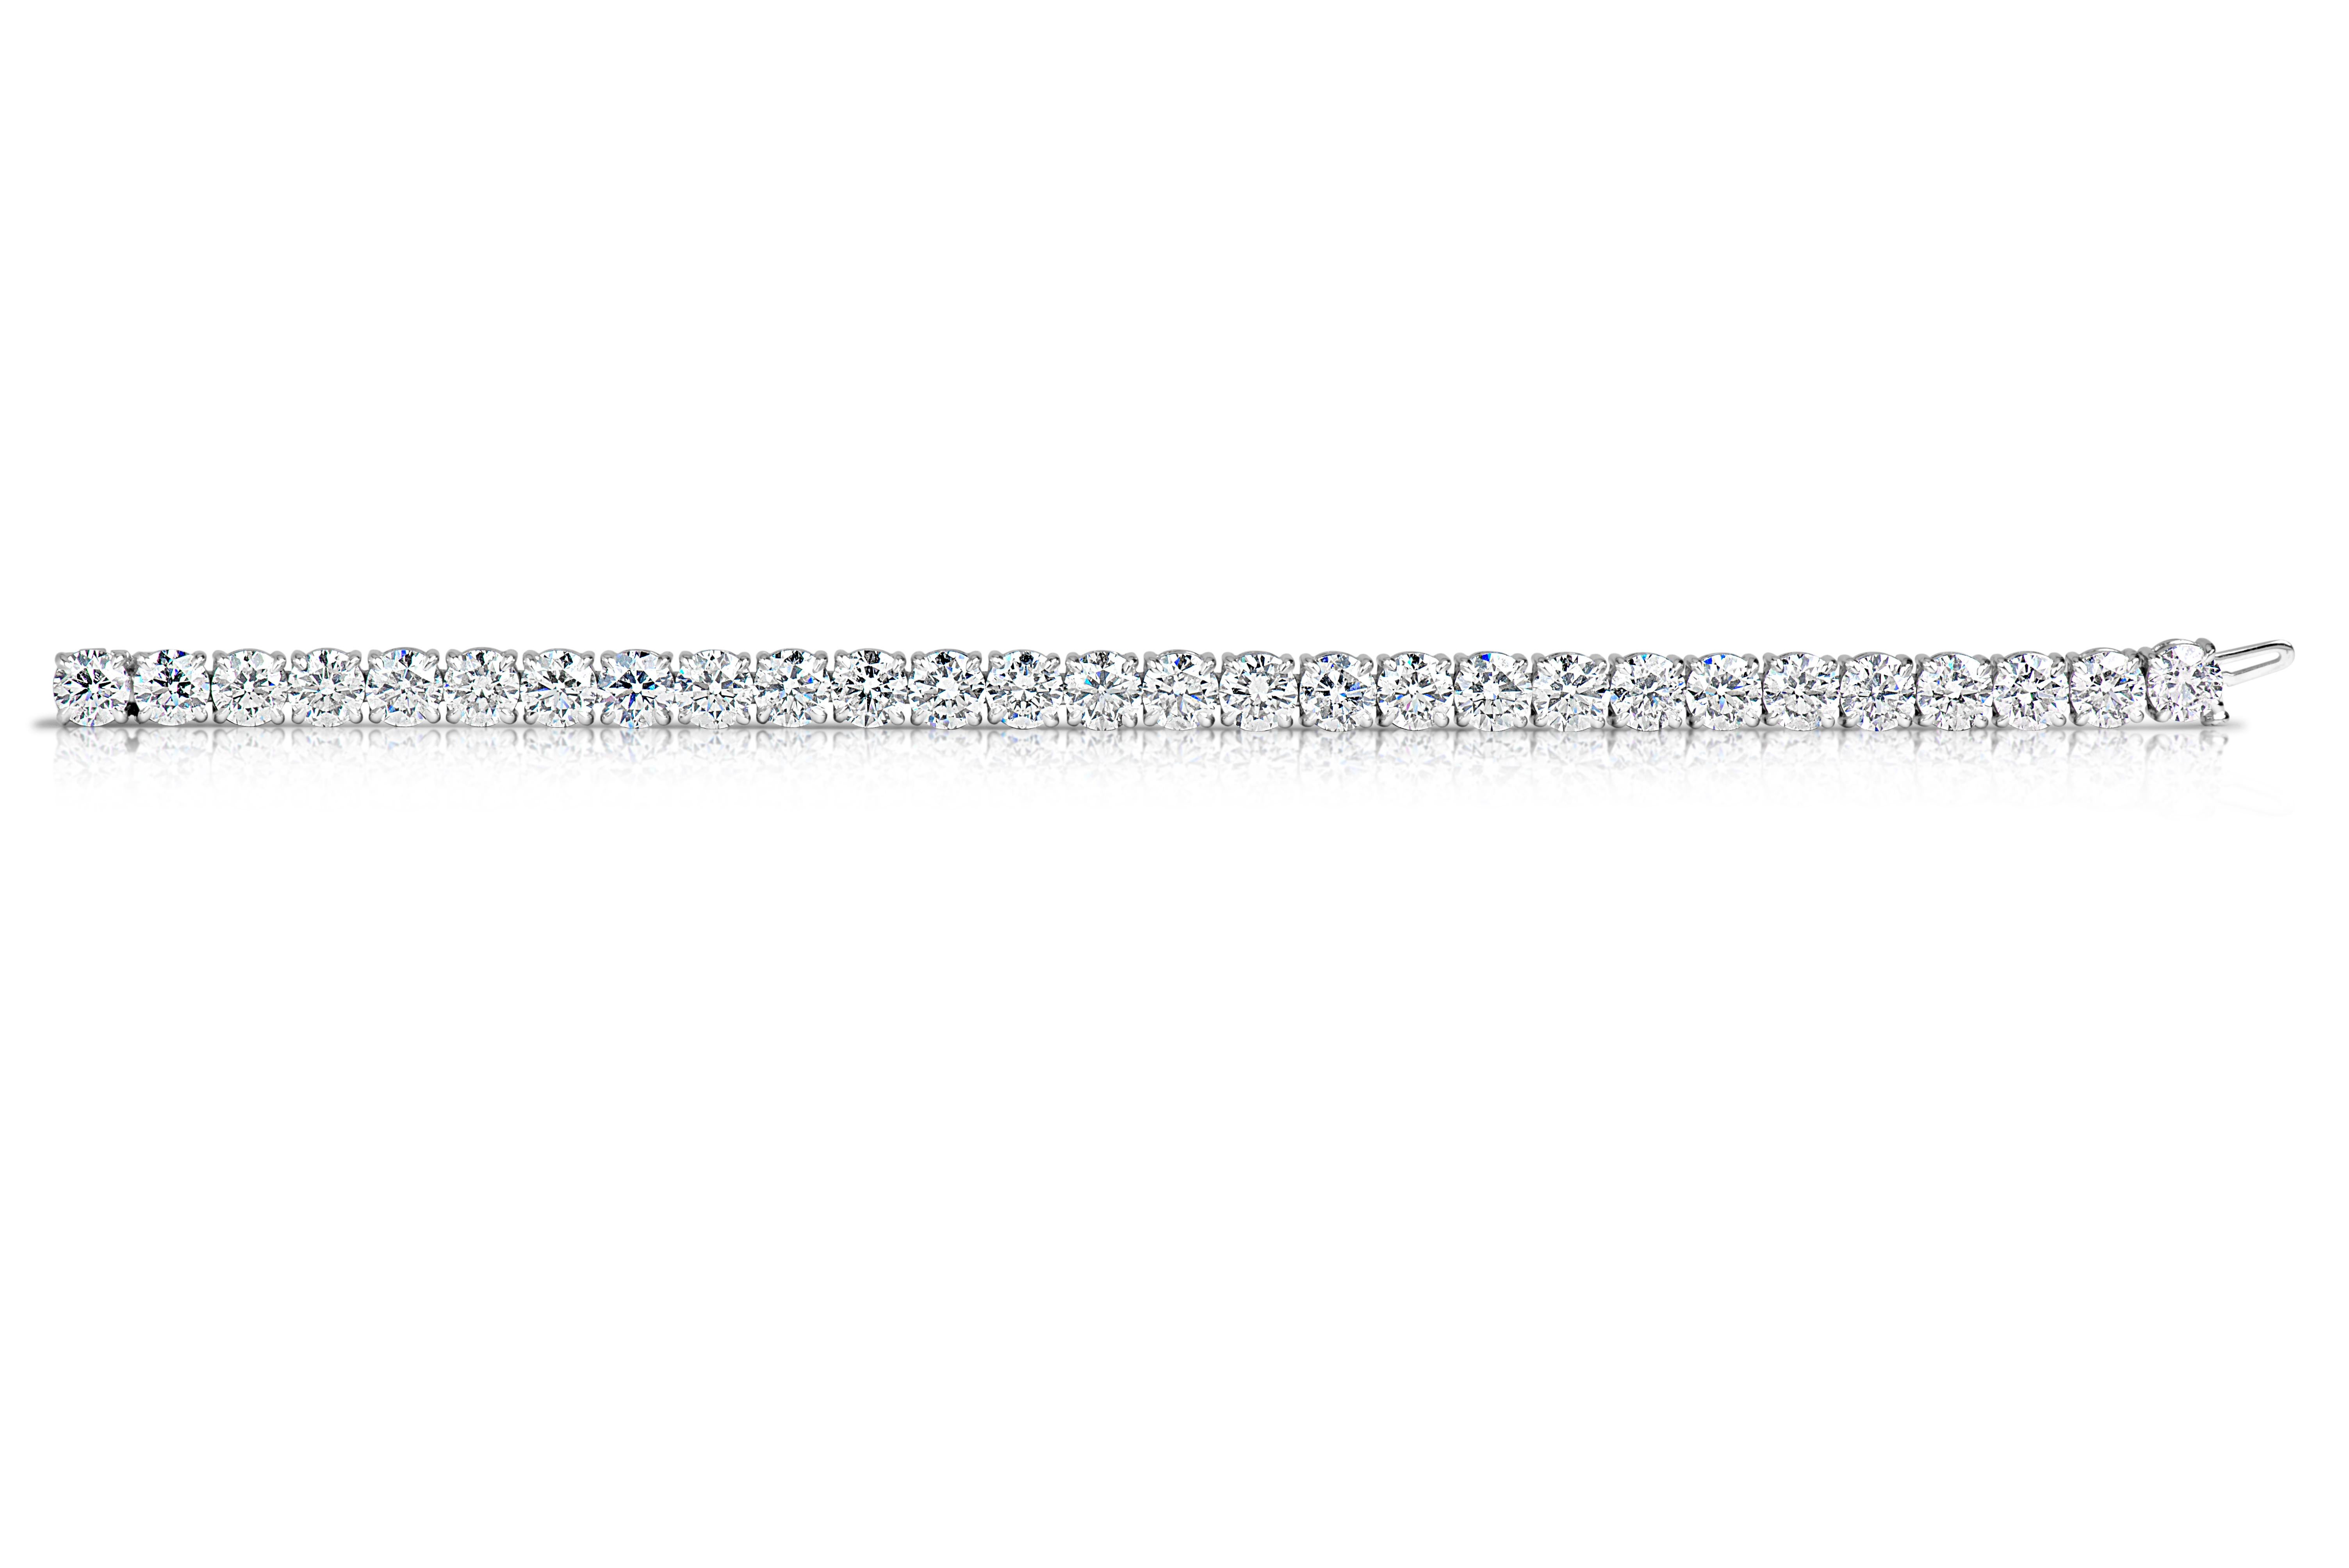 Diamond tennis bracelet featuring 41 round brilliants weighing 10 carats, in 14 karat white gold.
Color: G-H
Clarity: SI

